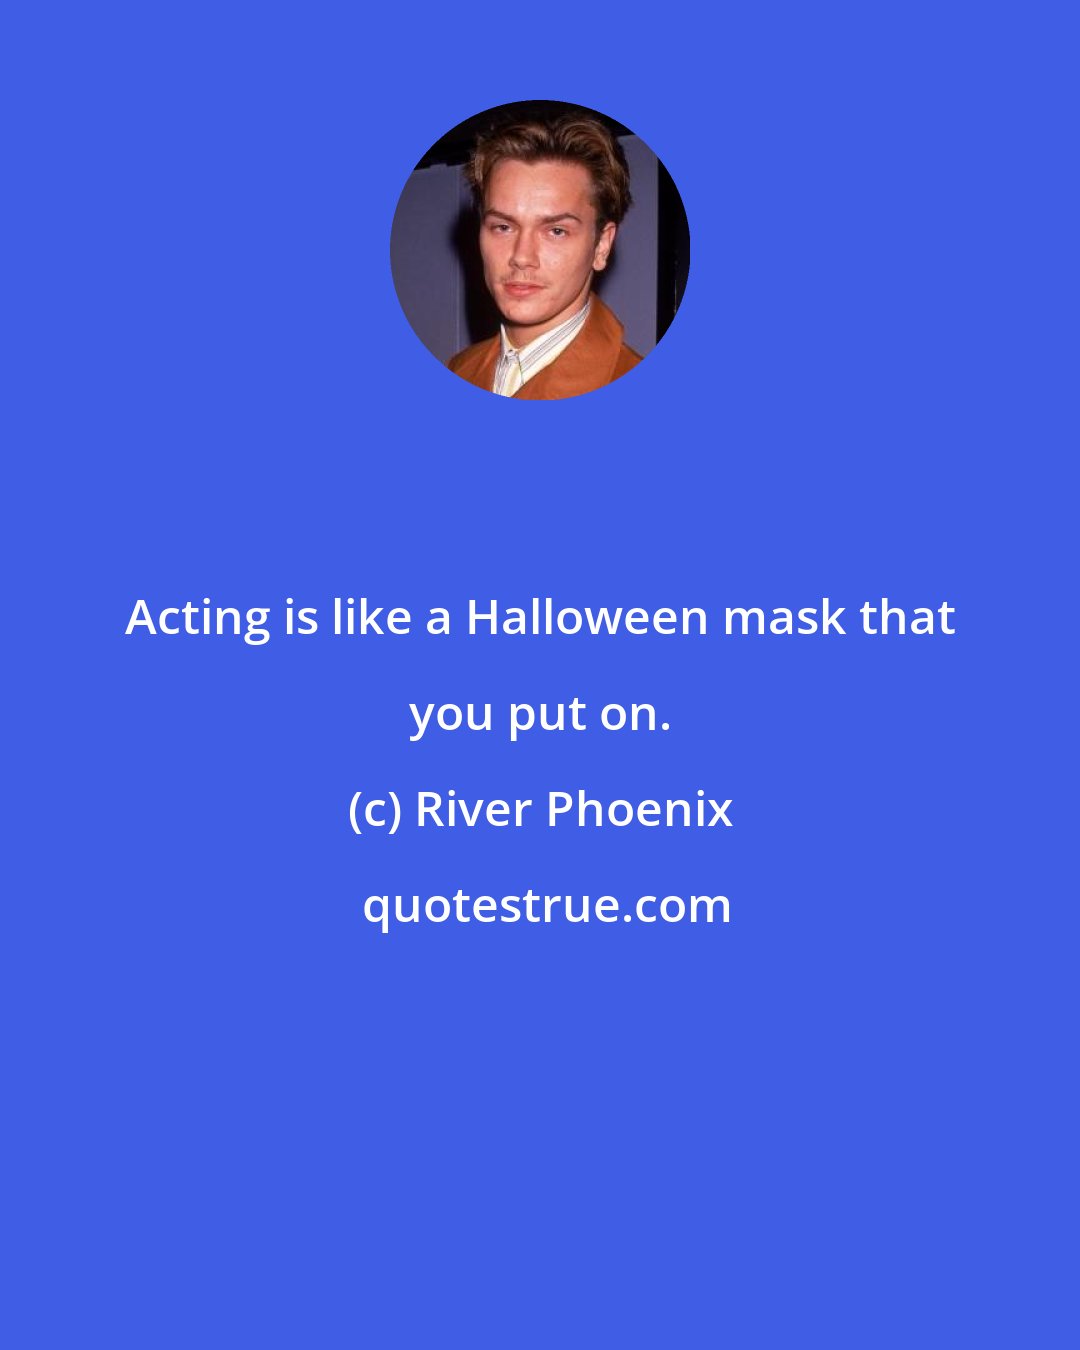 River Phoenix: Acting is like a Halloween mask that you put on.